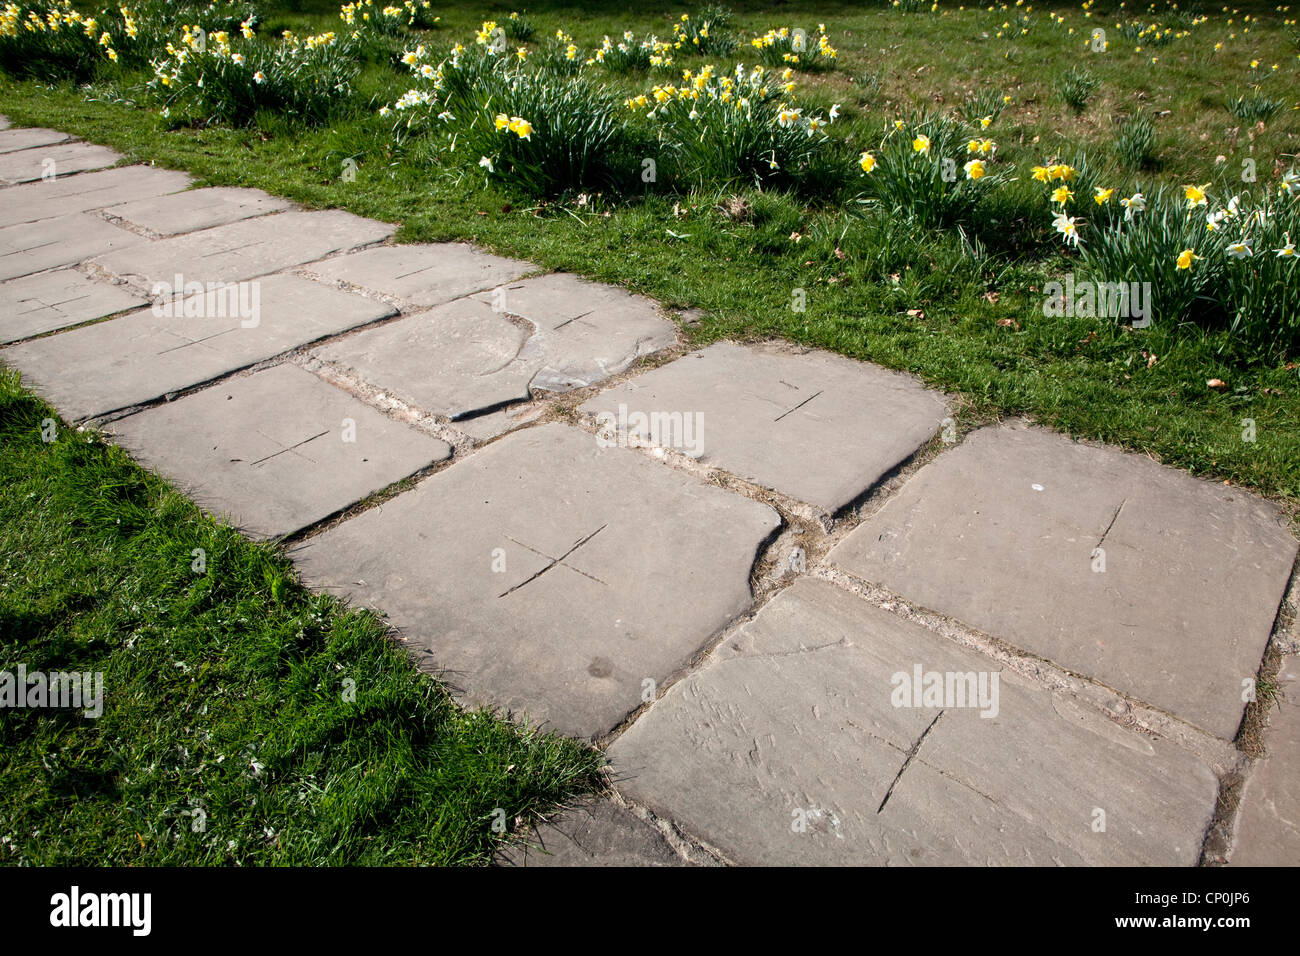 Yorkshire Paving Stones marked with a cross to avoid being stolen by thieves. Stock Photo